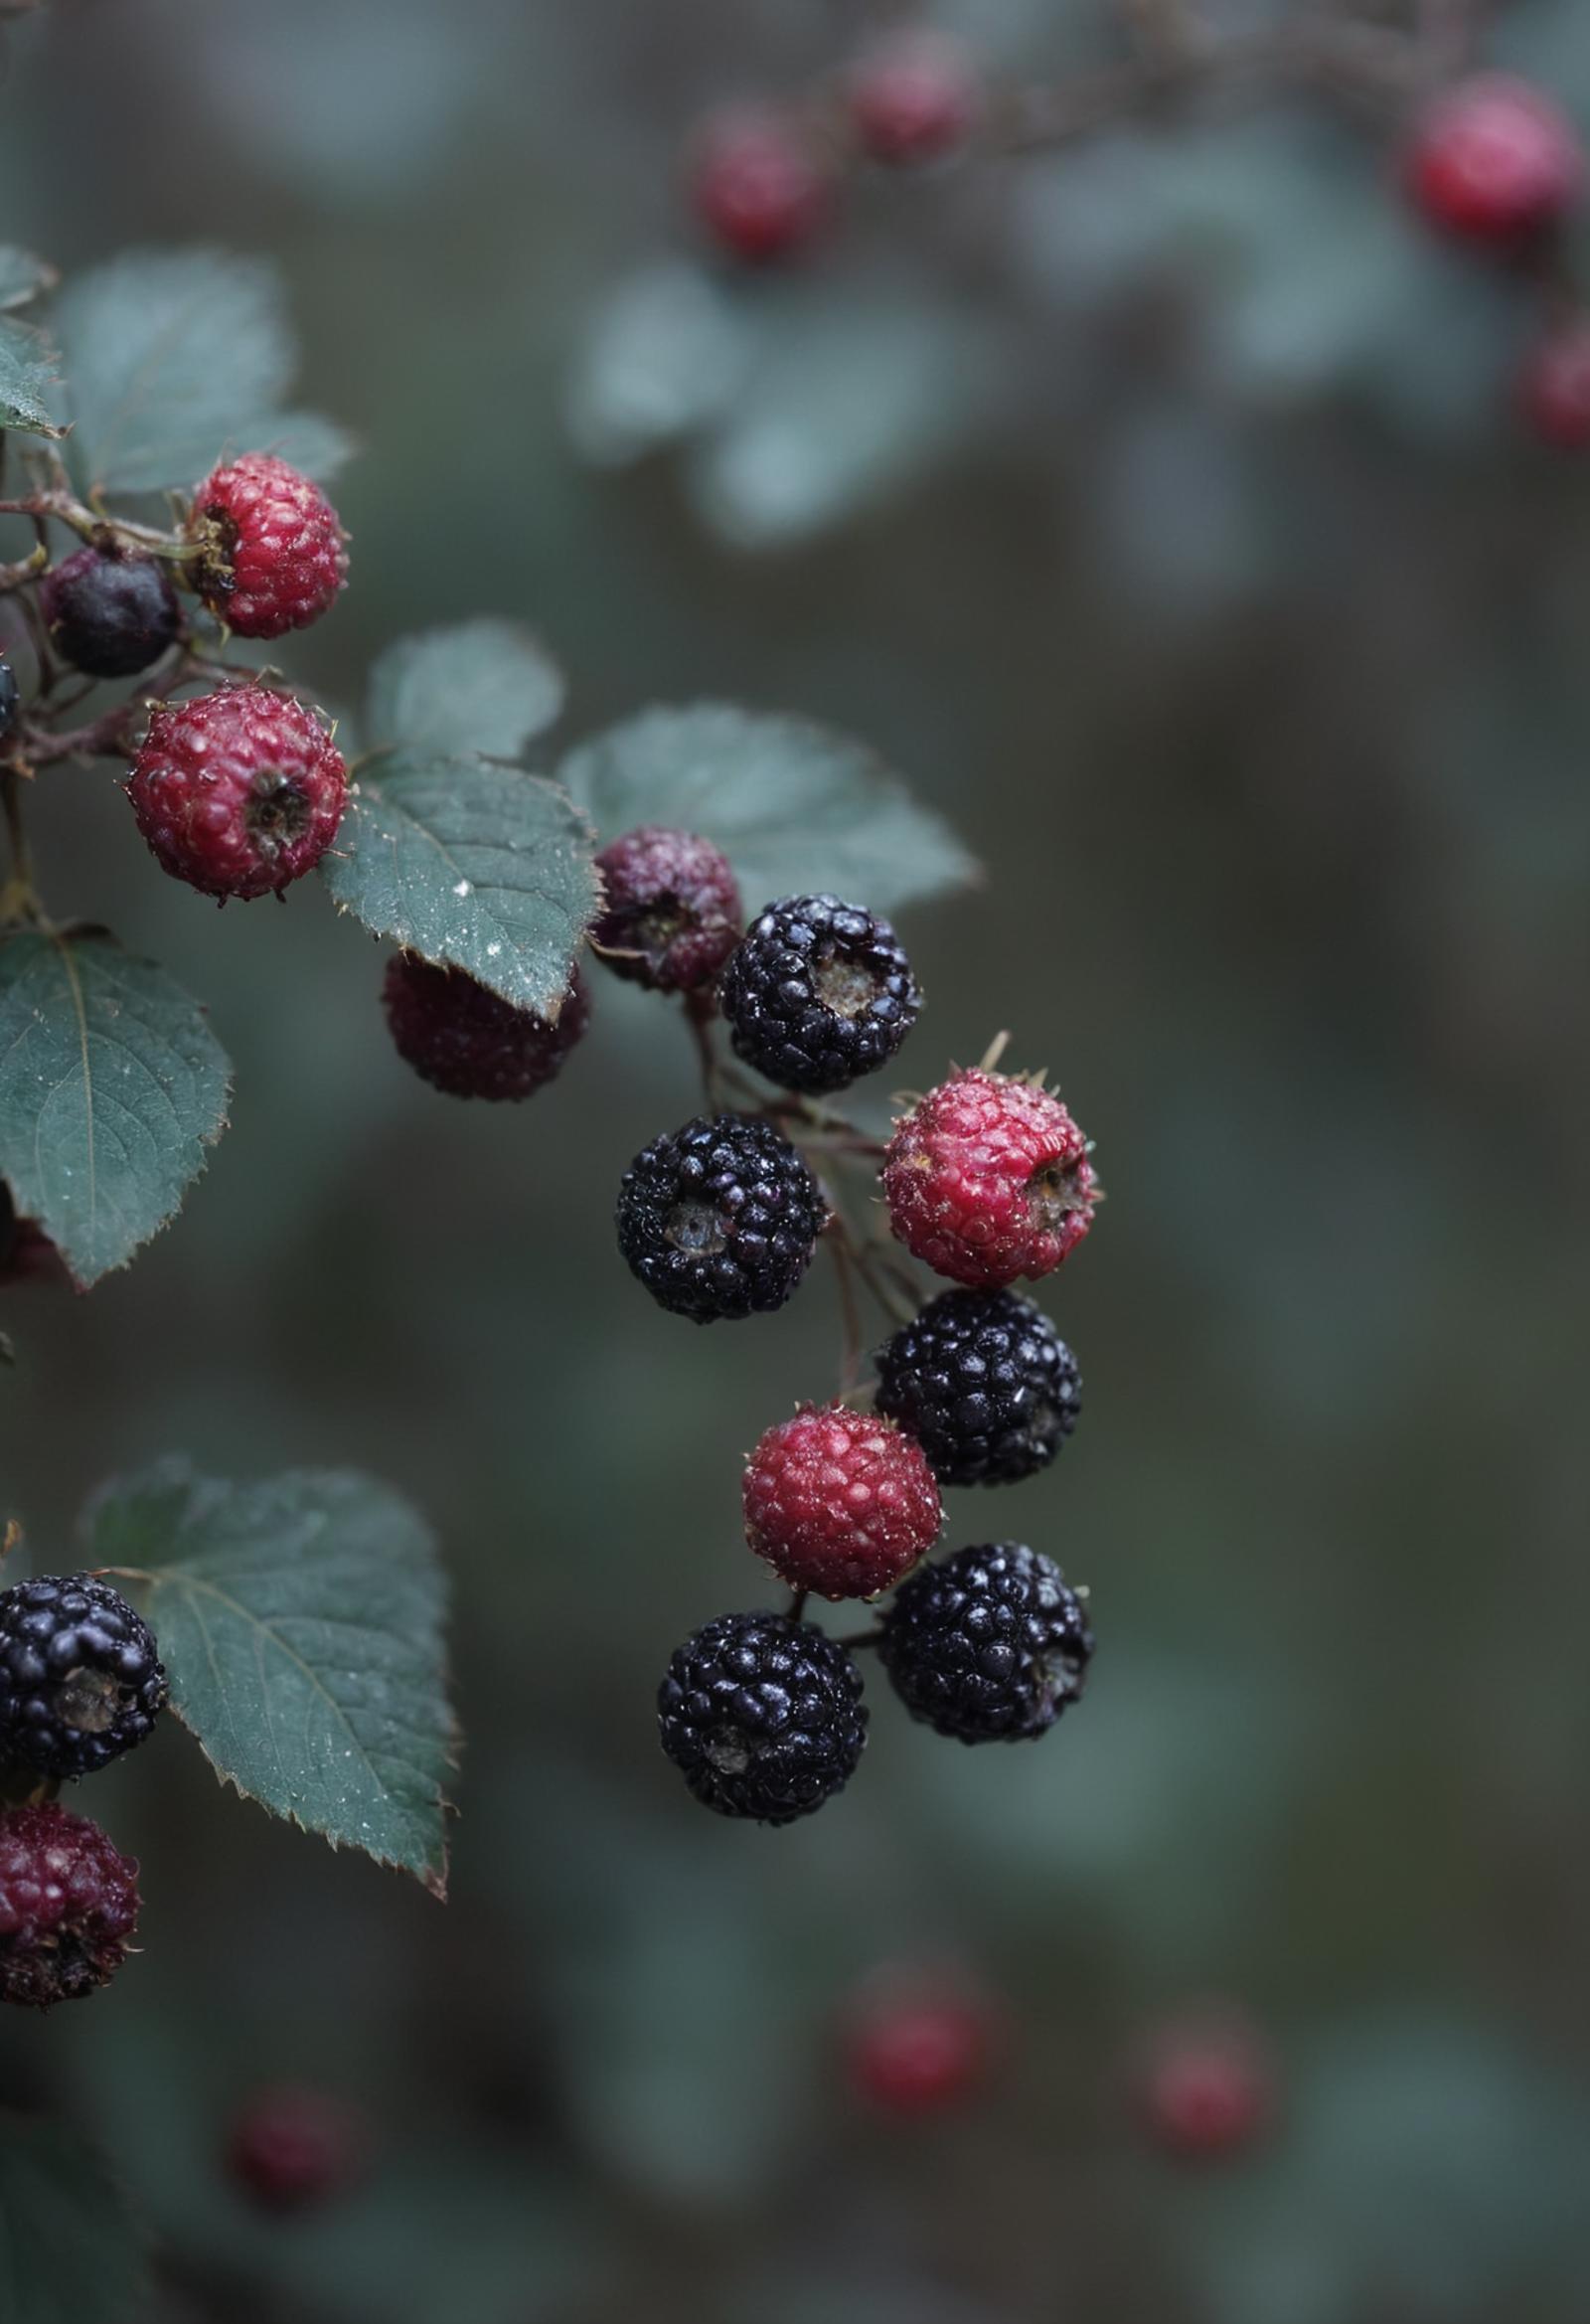 A close-up of a bush with berries, including blackberries and raspberries, hanging from the branches.